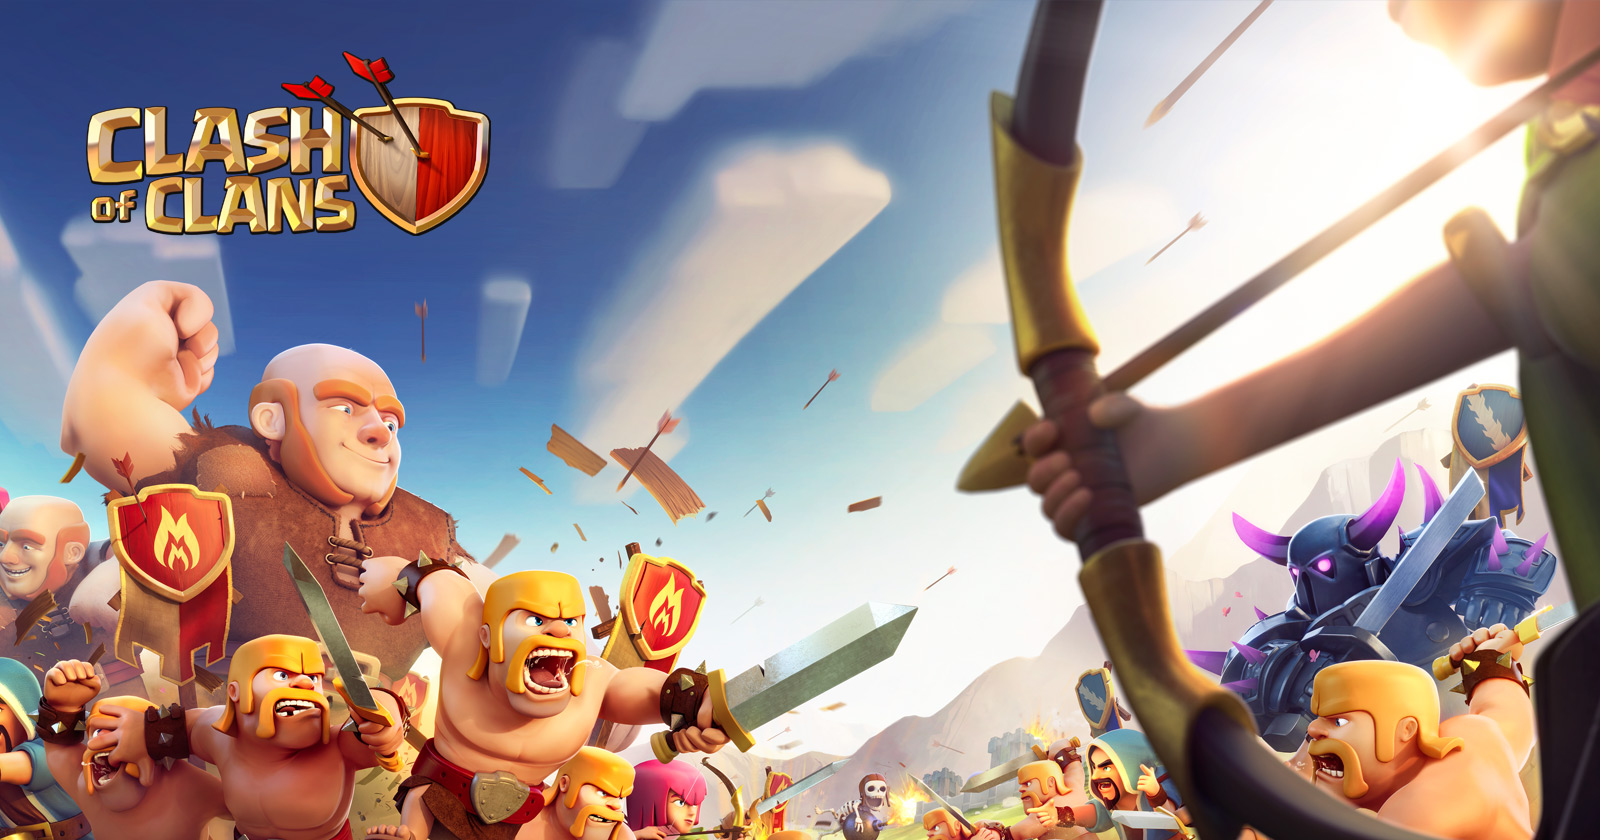 Clash of Clans Hack Tool Generator 2021 Get Free Unlimited Gems